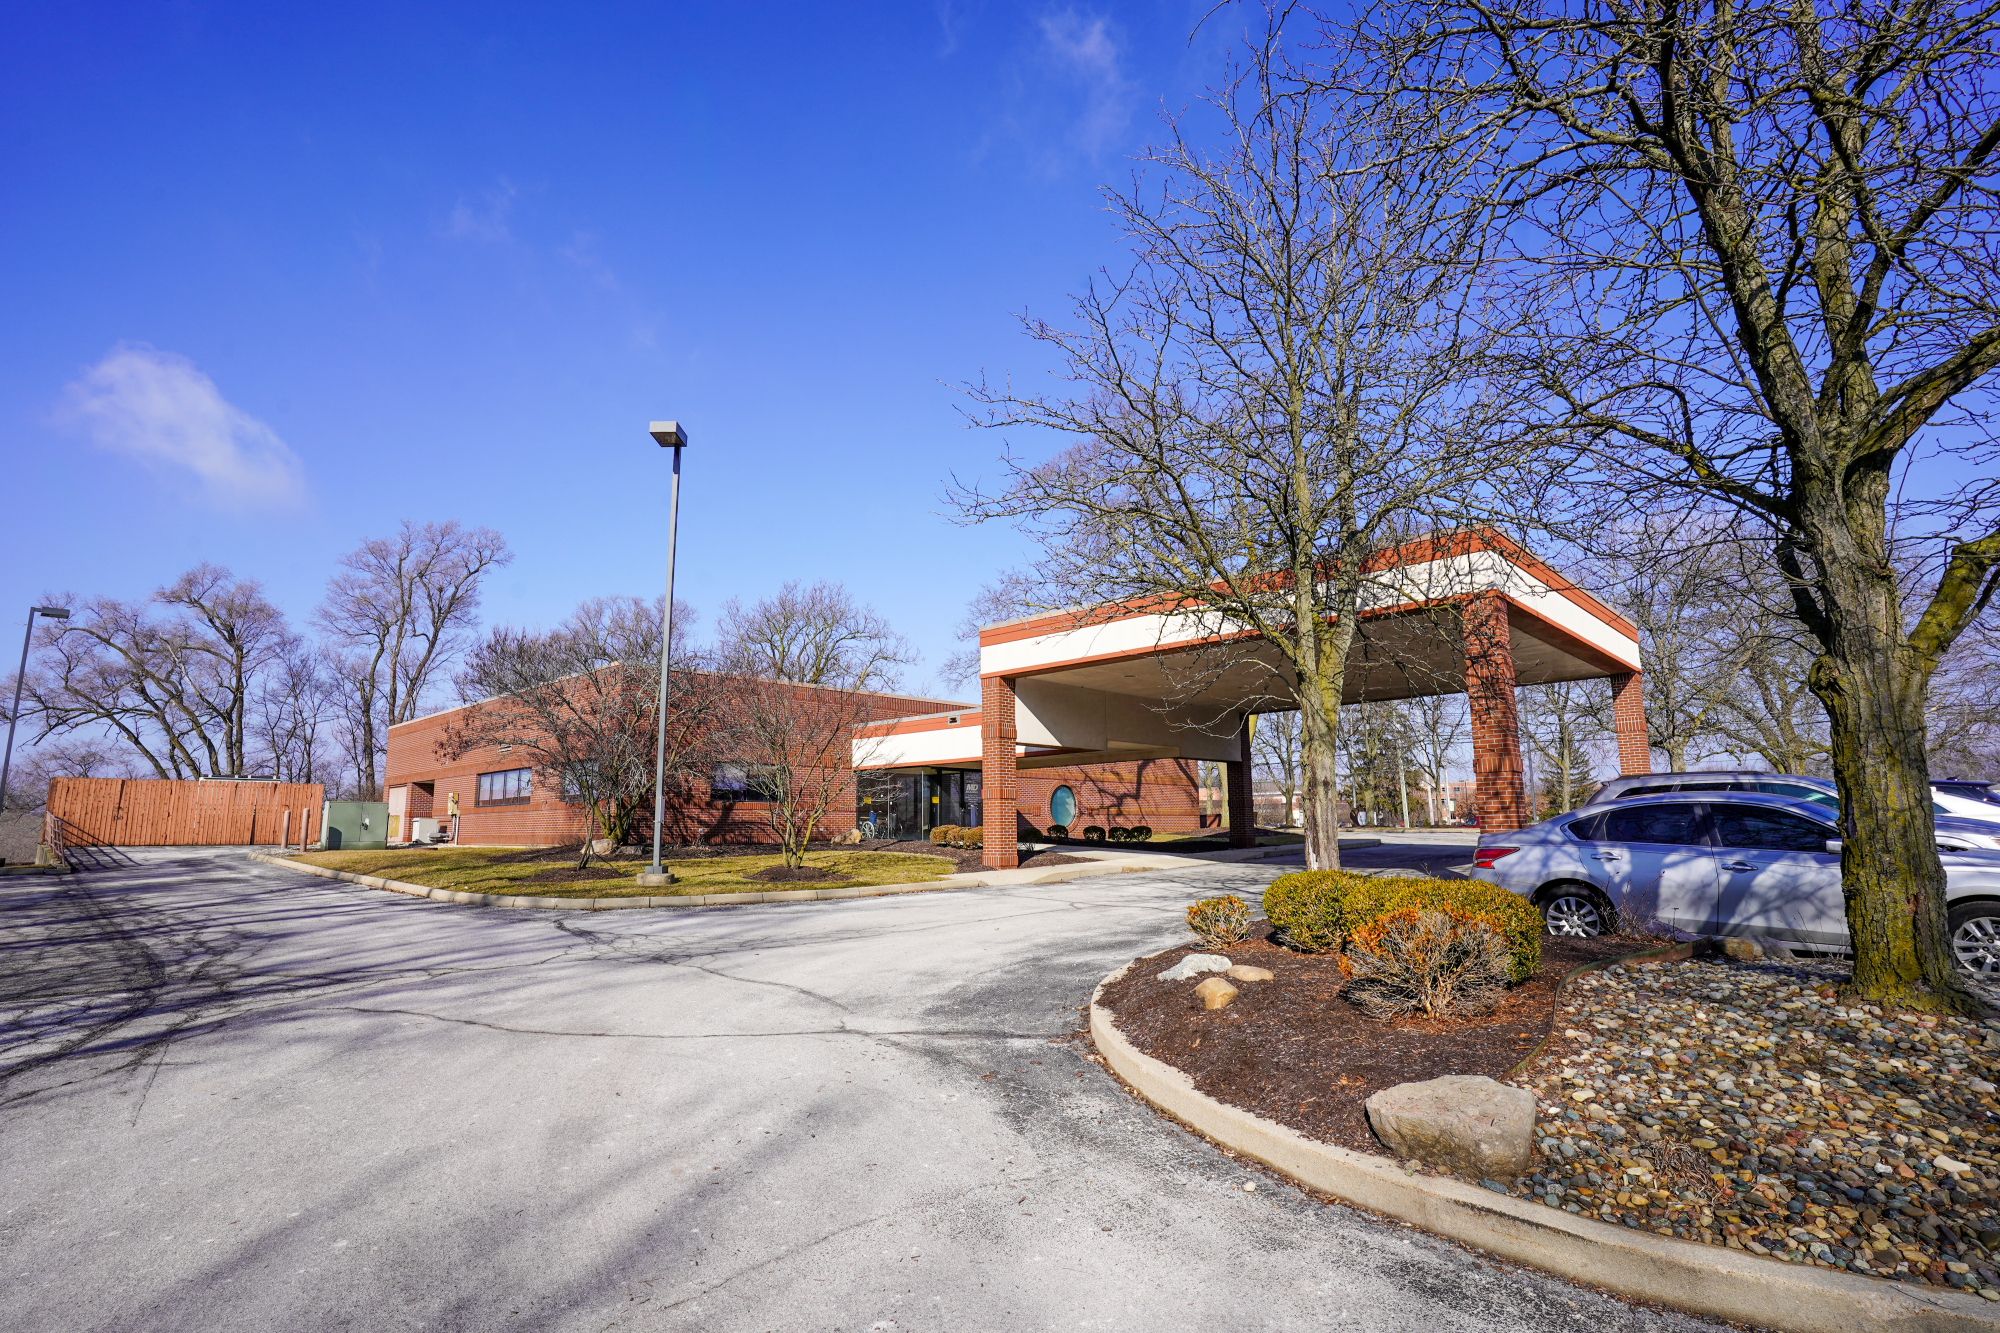 Sturges Property Group - General or Medical Office Space For Sale on Lake Avenue in Fort Wayne, IN